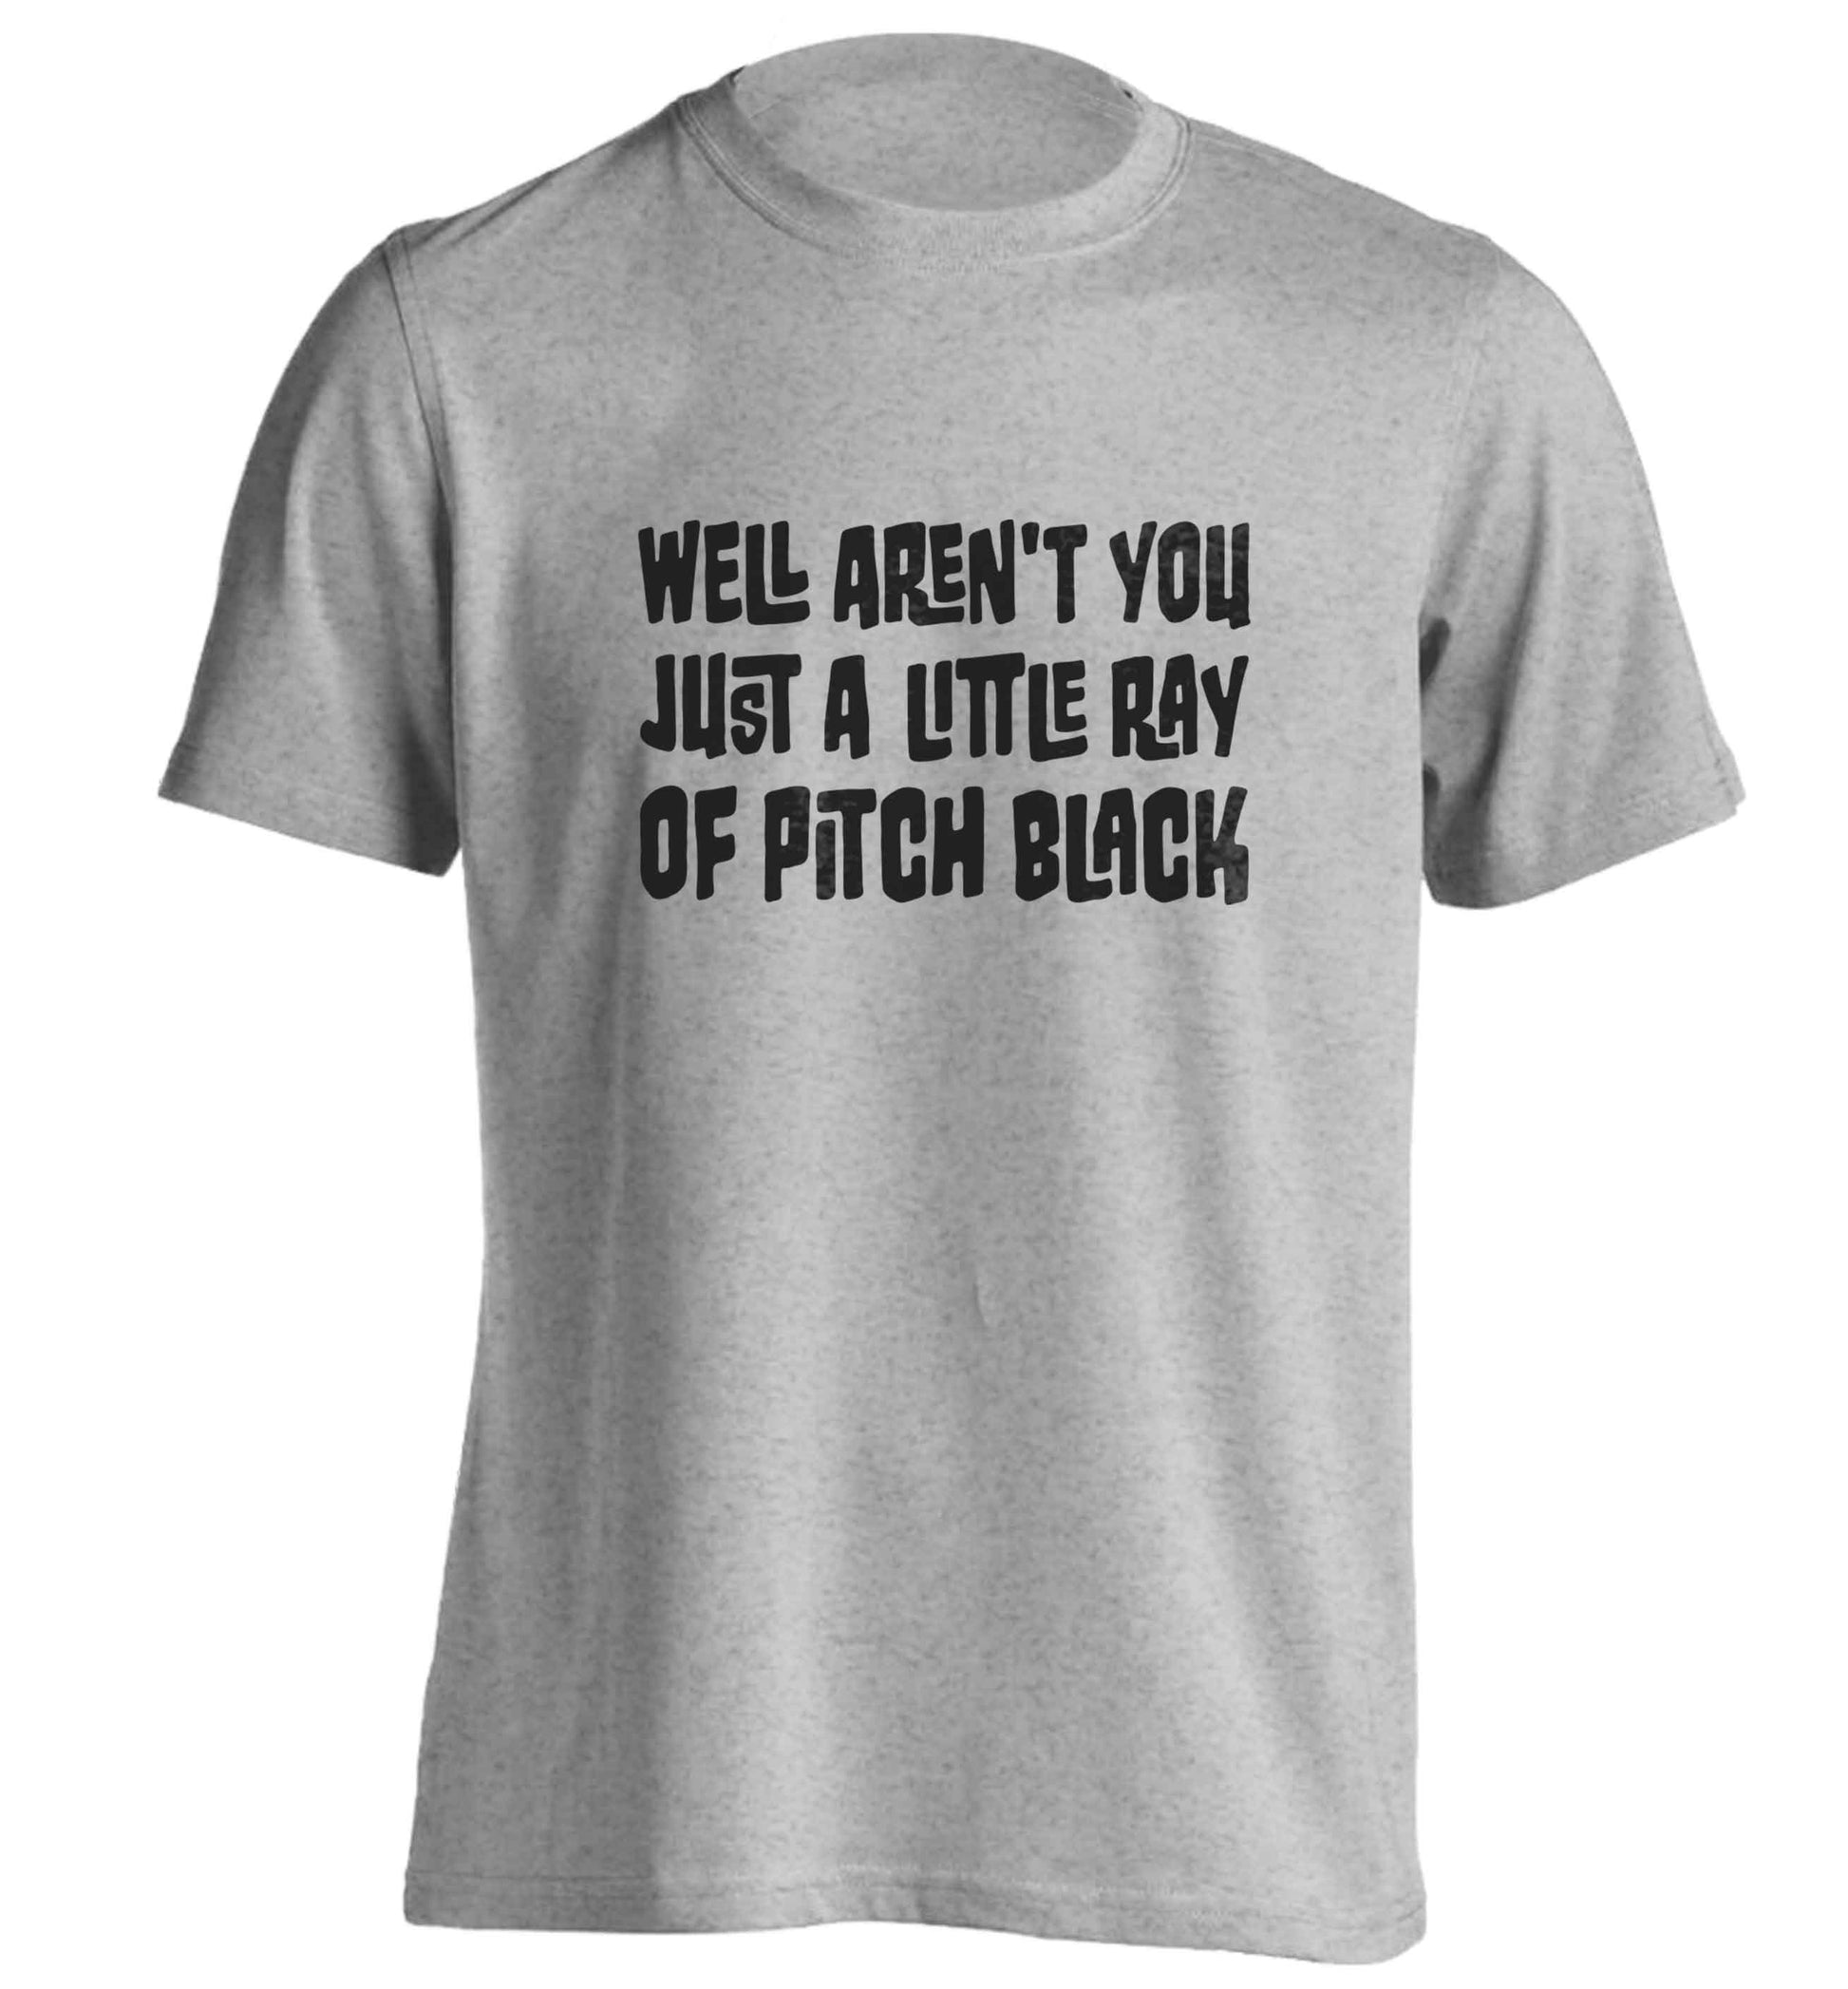 Well aren't you just a little ray of pitch black Kit adults unisex grey Tshirt 2XL